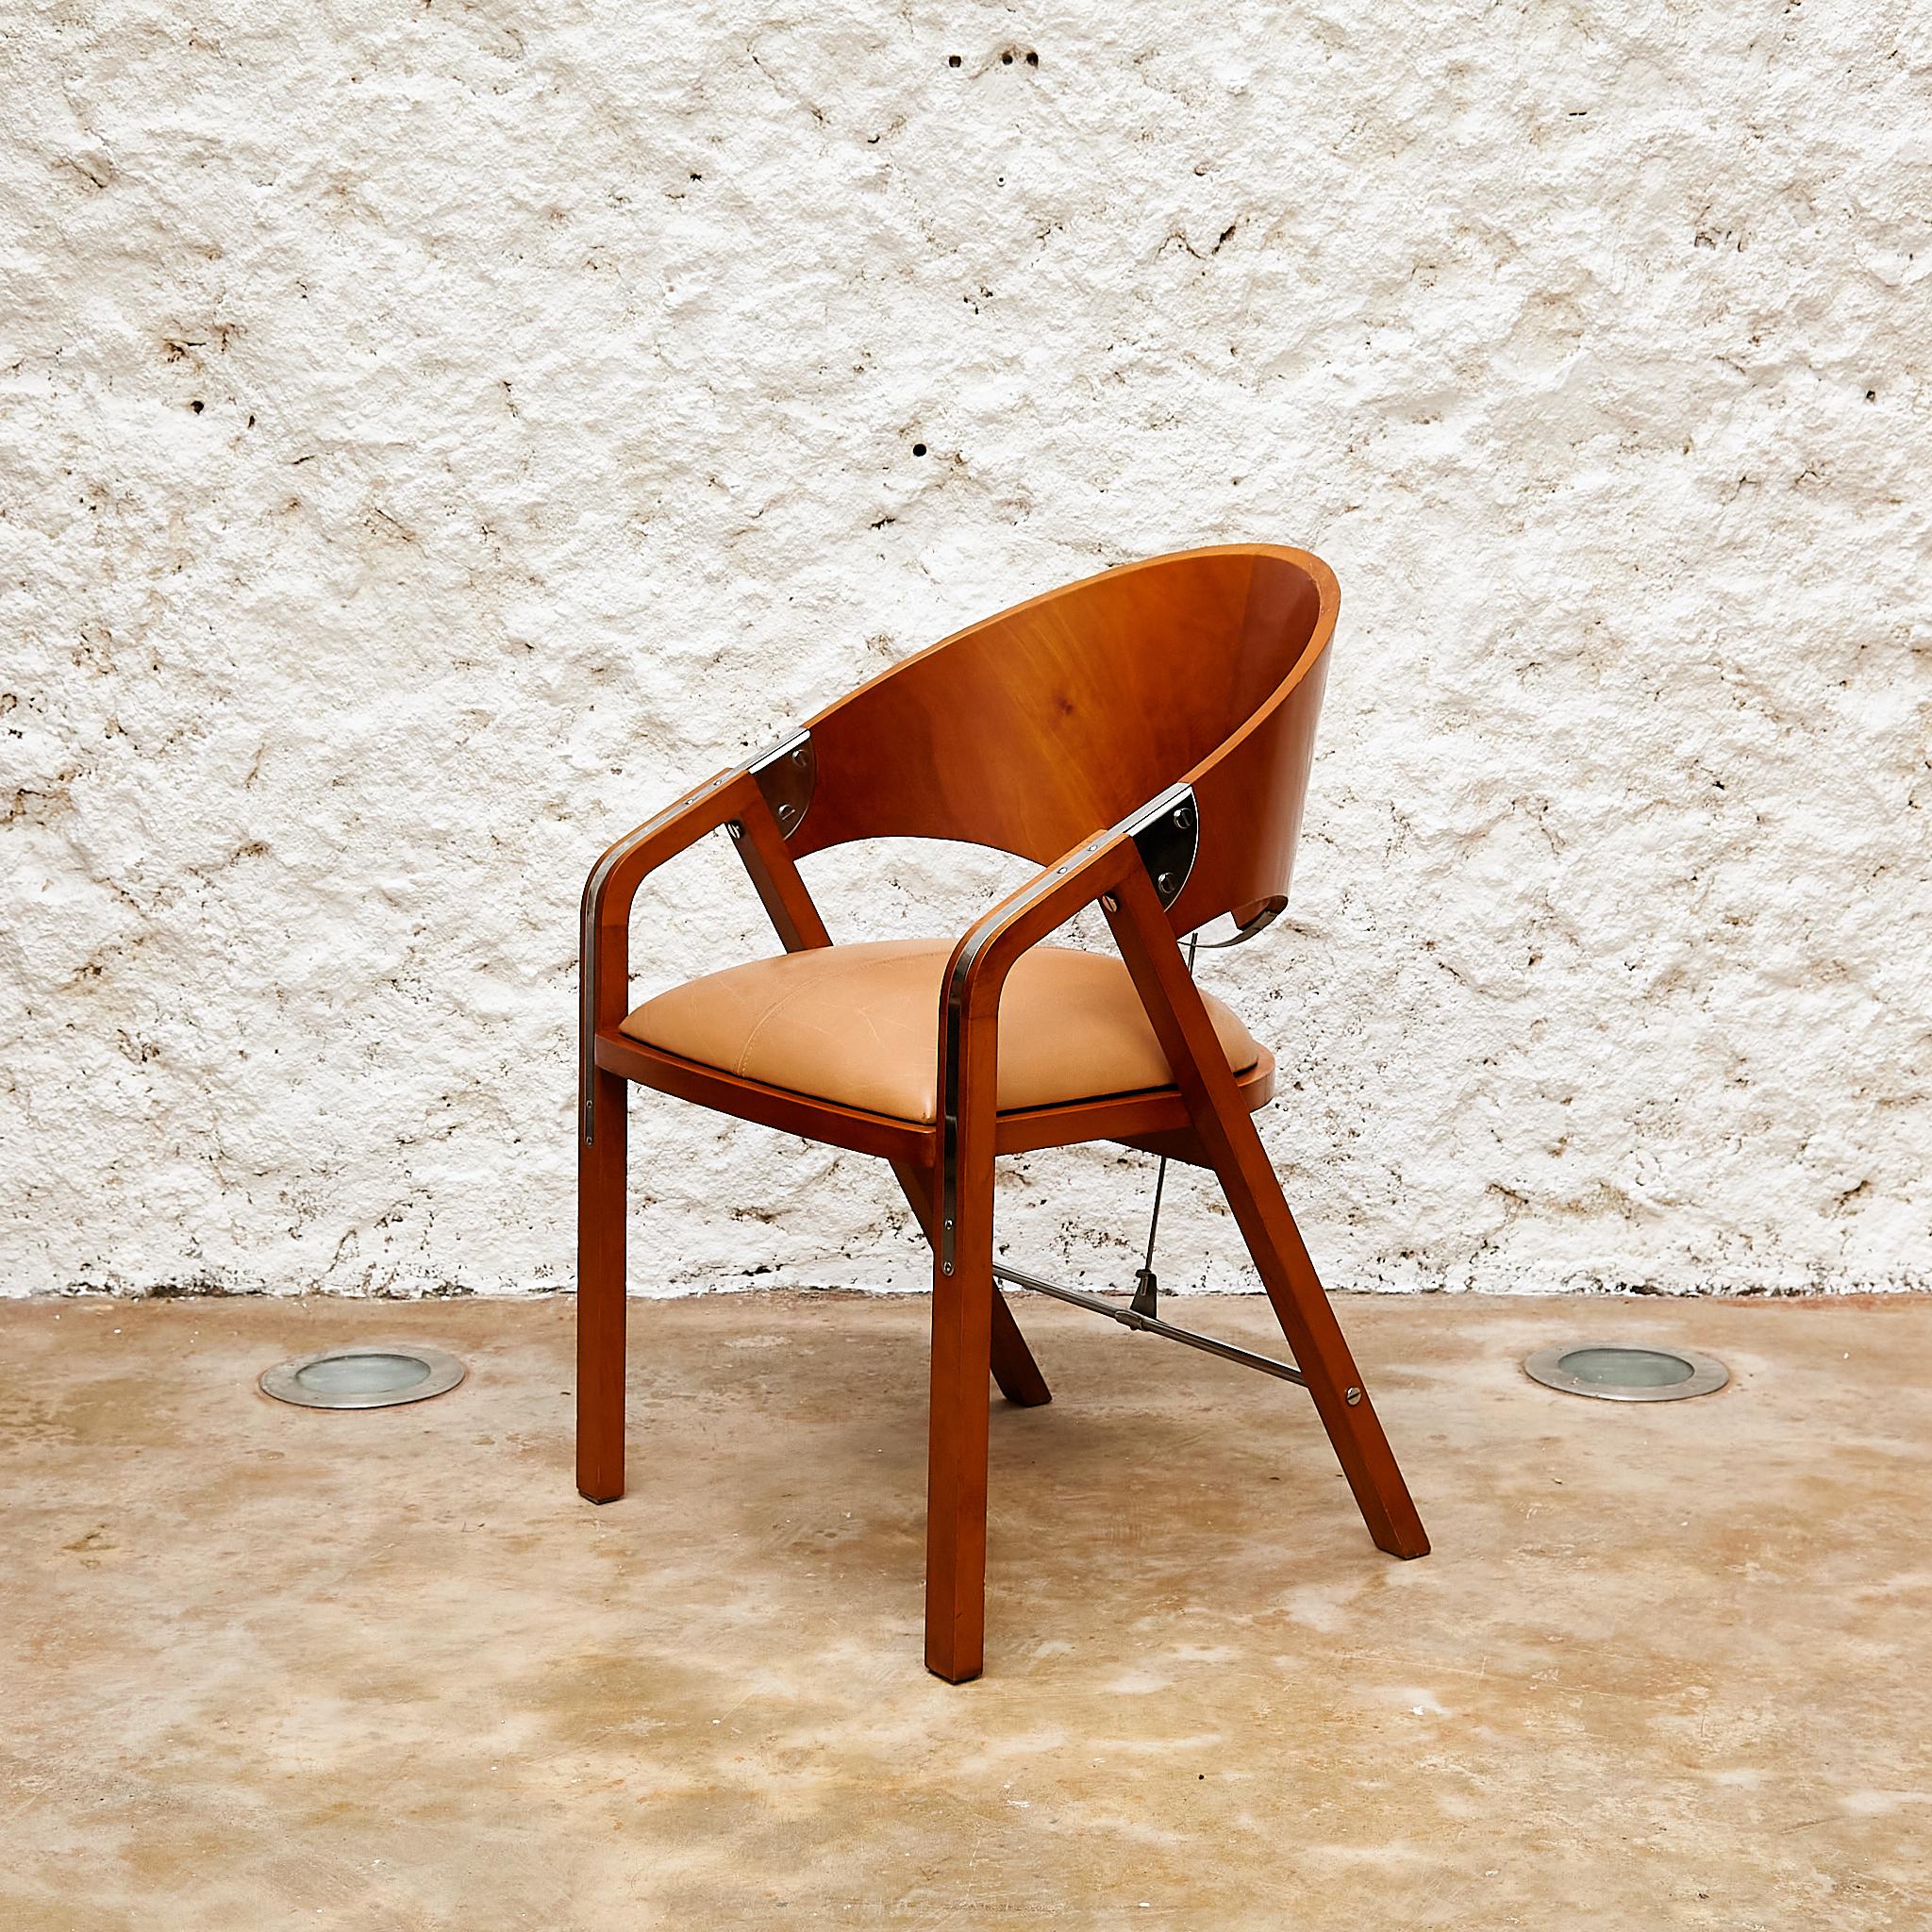 Spanish The Vintage 'Spinnaker' Chairs by Jamie Tresserra - Wood, Metal and Leather For Sale